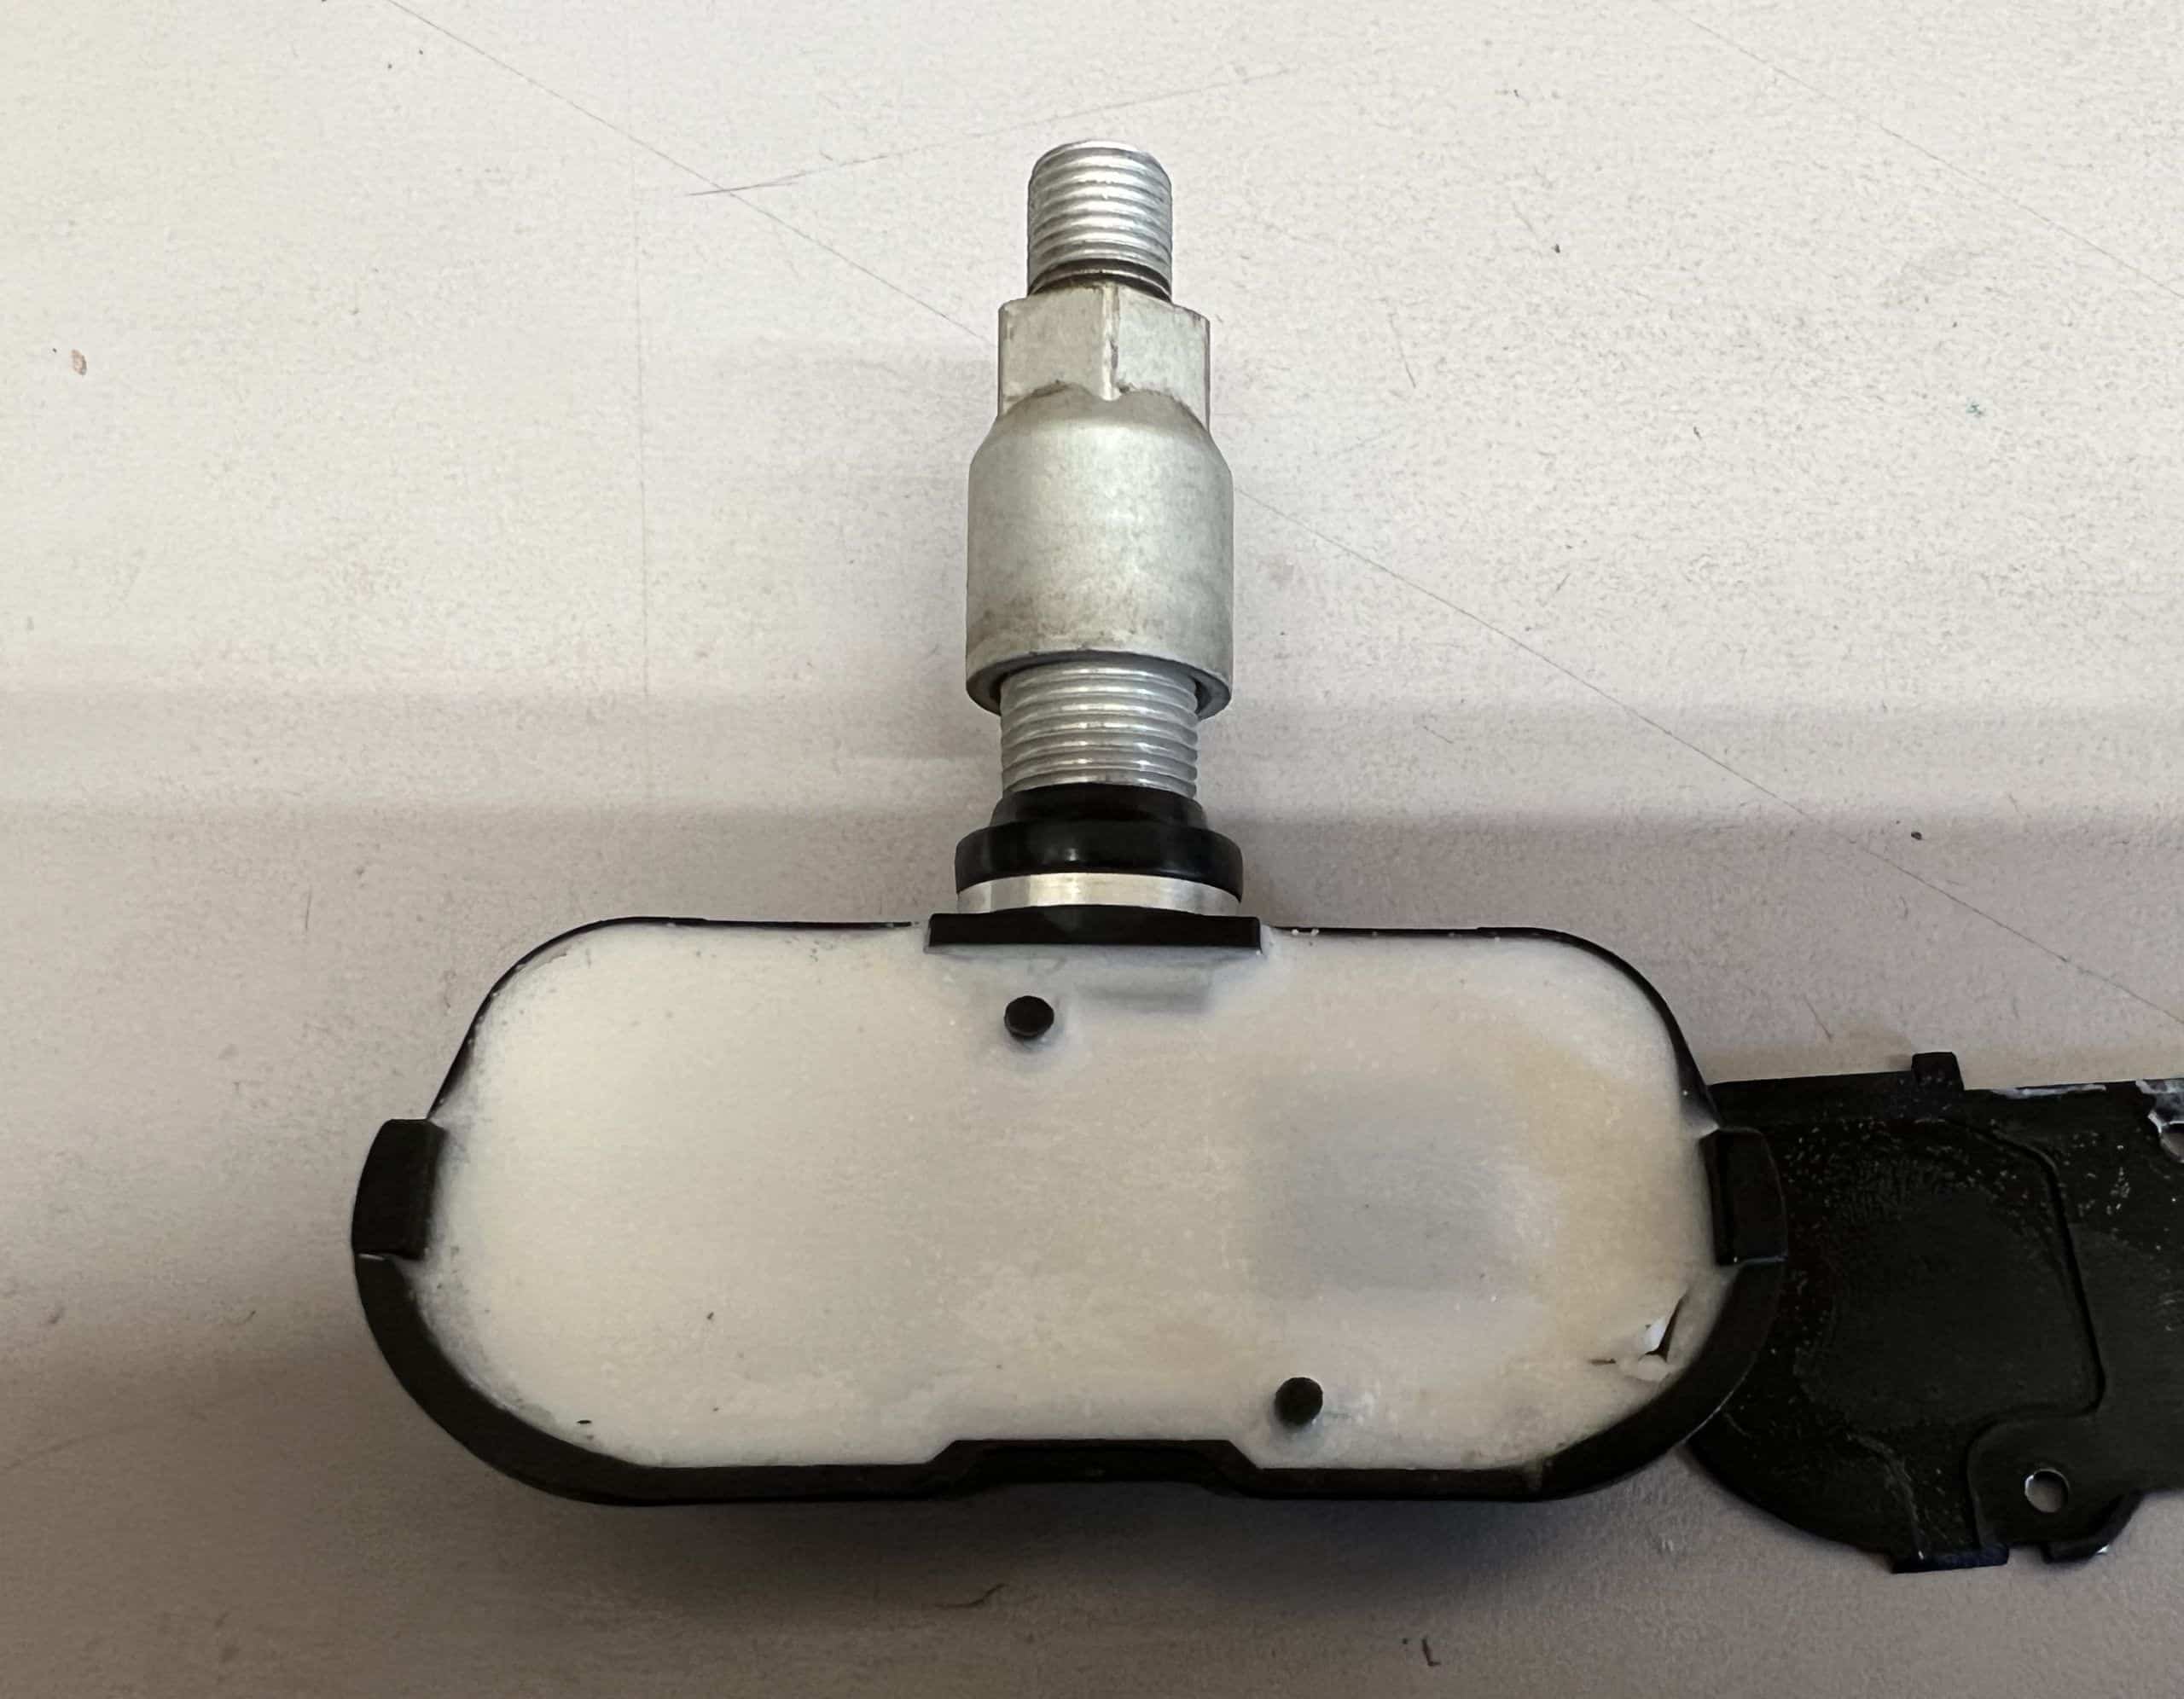 The back side of a TPMS sensor with potting compound covering the TPMS sensor battery.